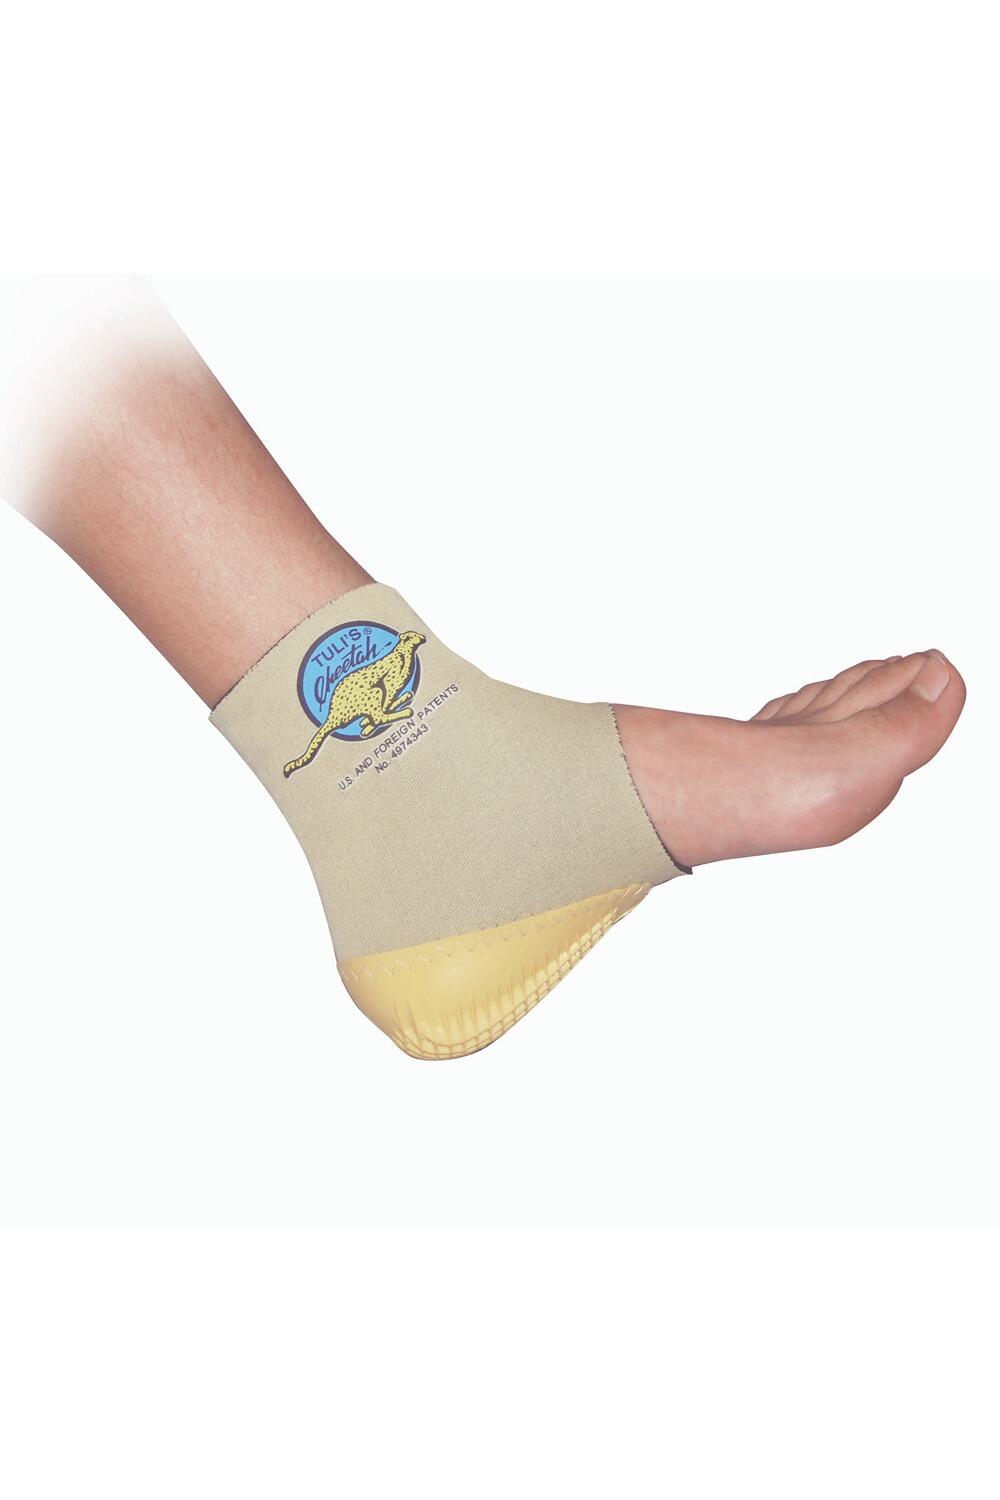 Cheetahs Ankle Support with Heel Cup 1/3